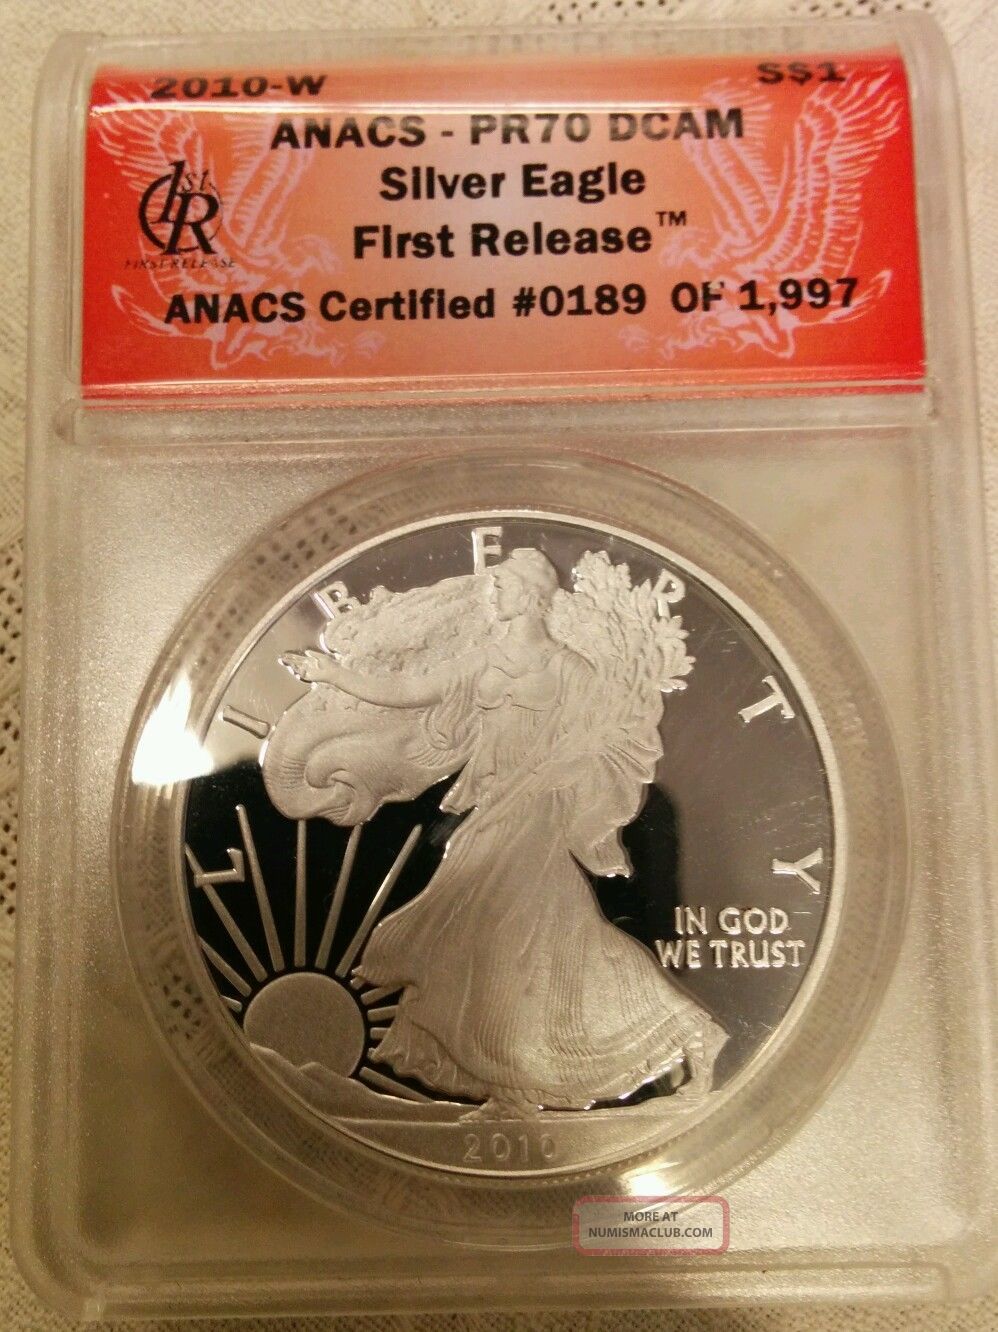 2010 W Silver Eagle Anacs Pr70 Dcam First Release 189 Of 1997 Nr